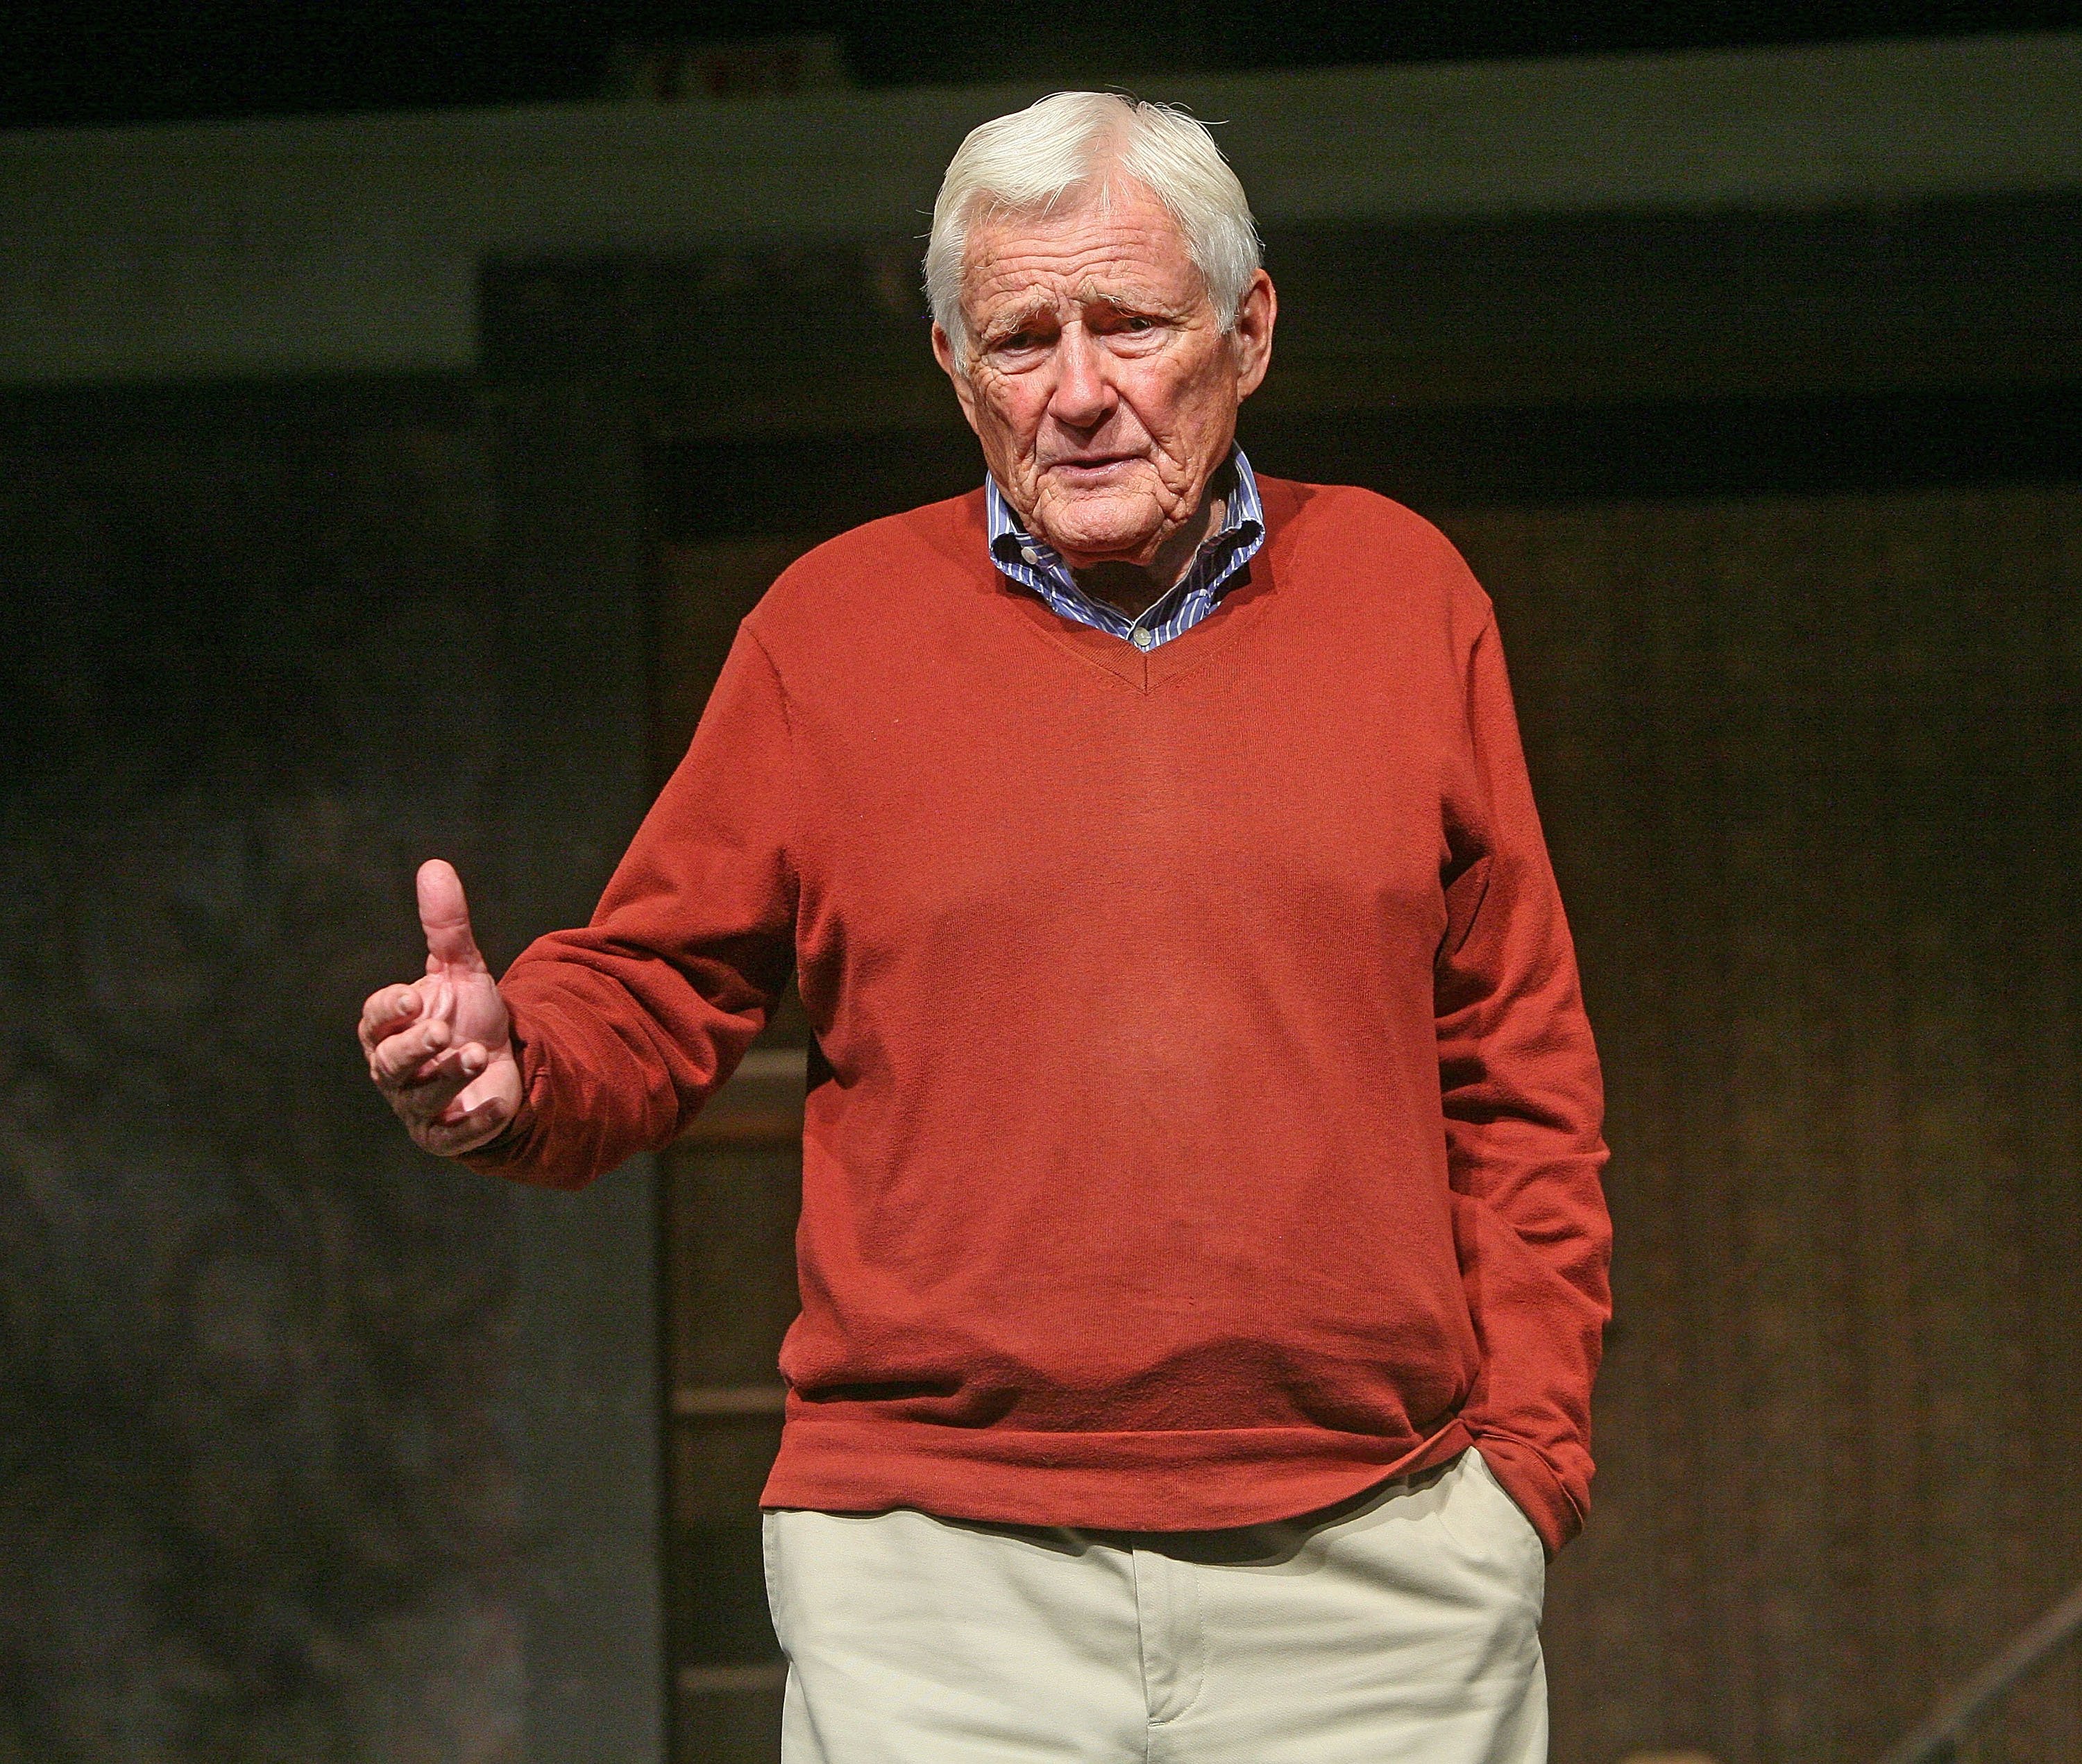 Comedian Orson Bean performs his one man play "Safe At Home - an evening with Orson Bean" at Pacific Resident Theatre on March 26, 2016 in Venice, California | Photo: Getty Images